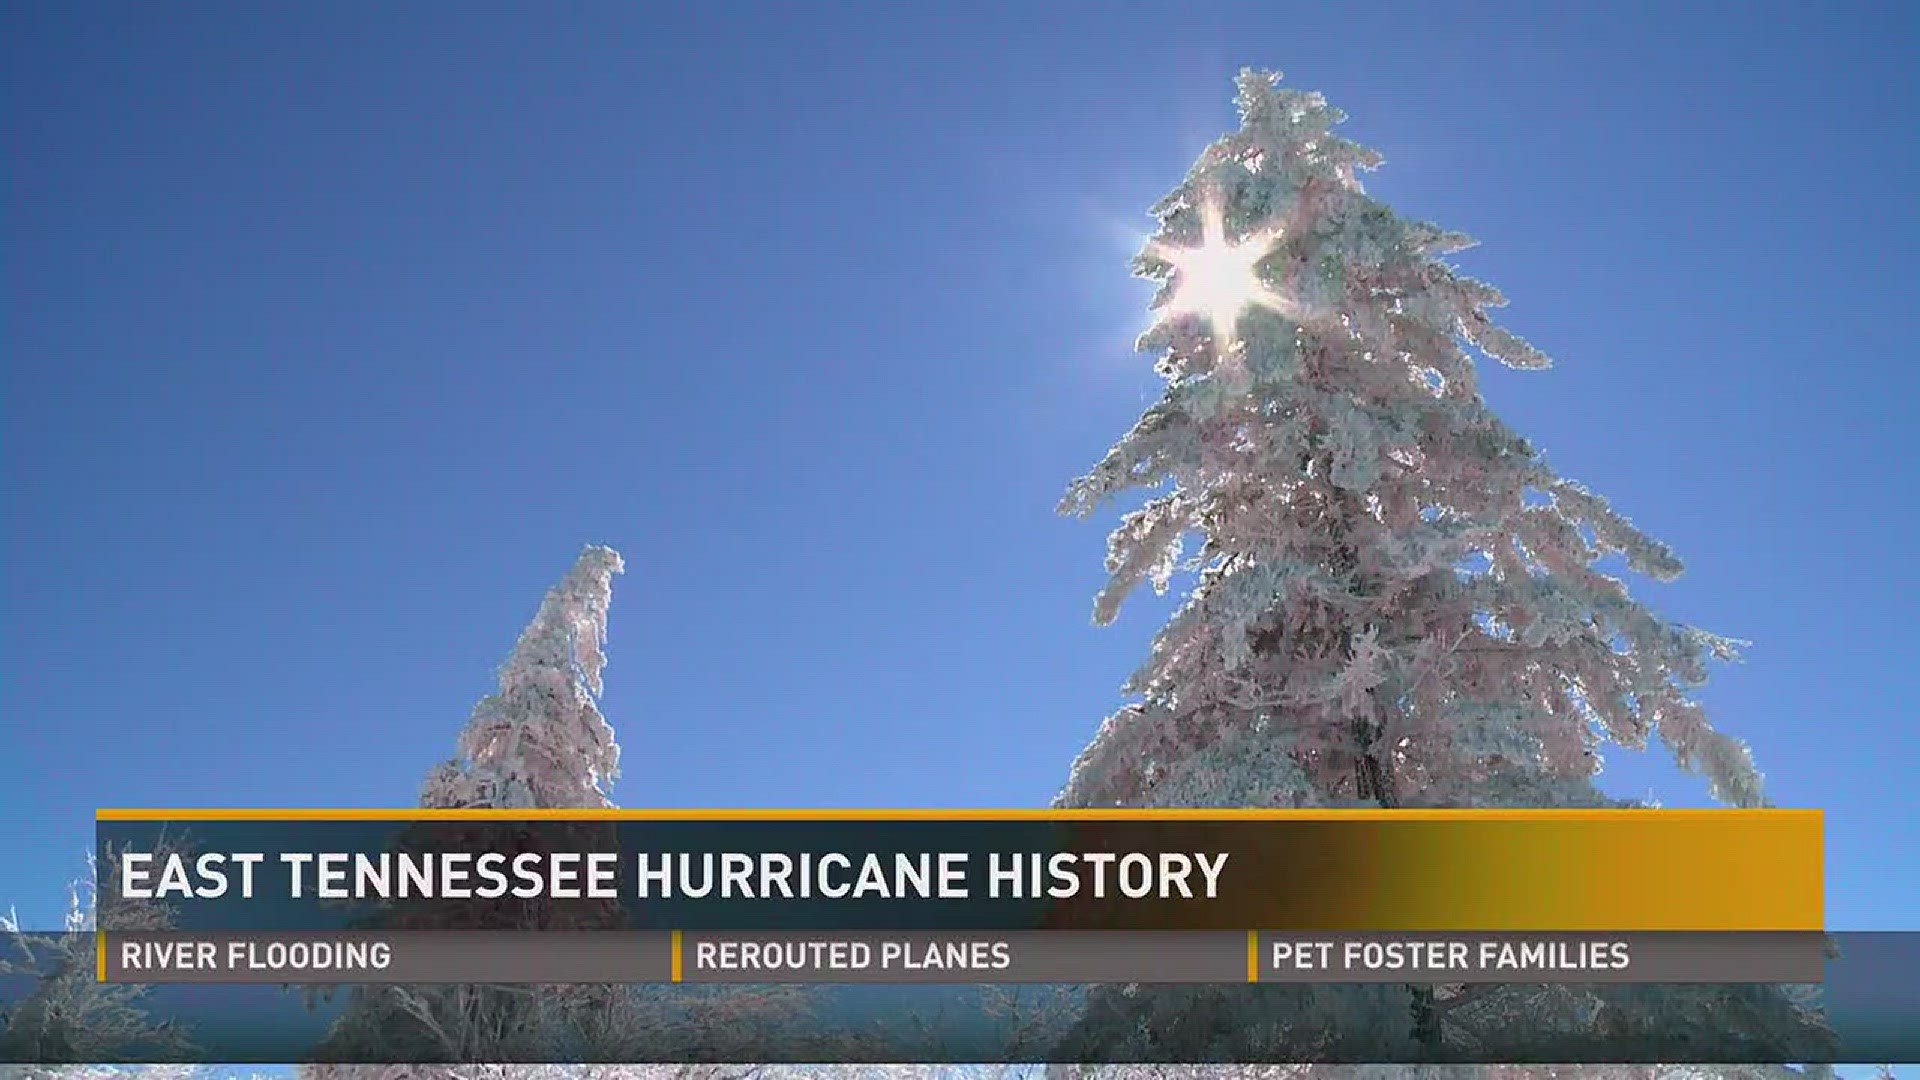 Hurricanes are rare in this part of the country, but several previous storms have impacted East Tennessee.